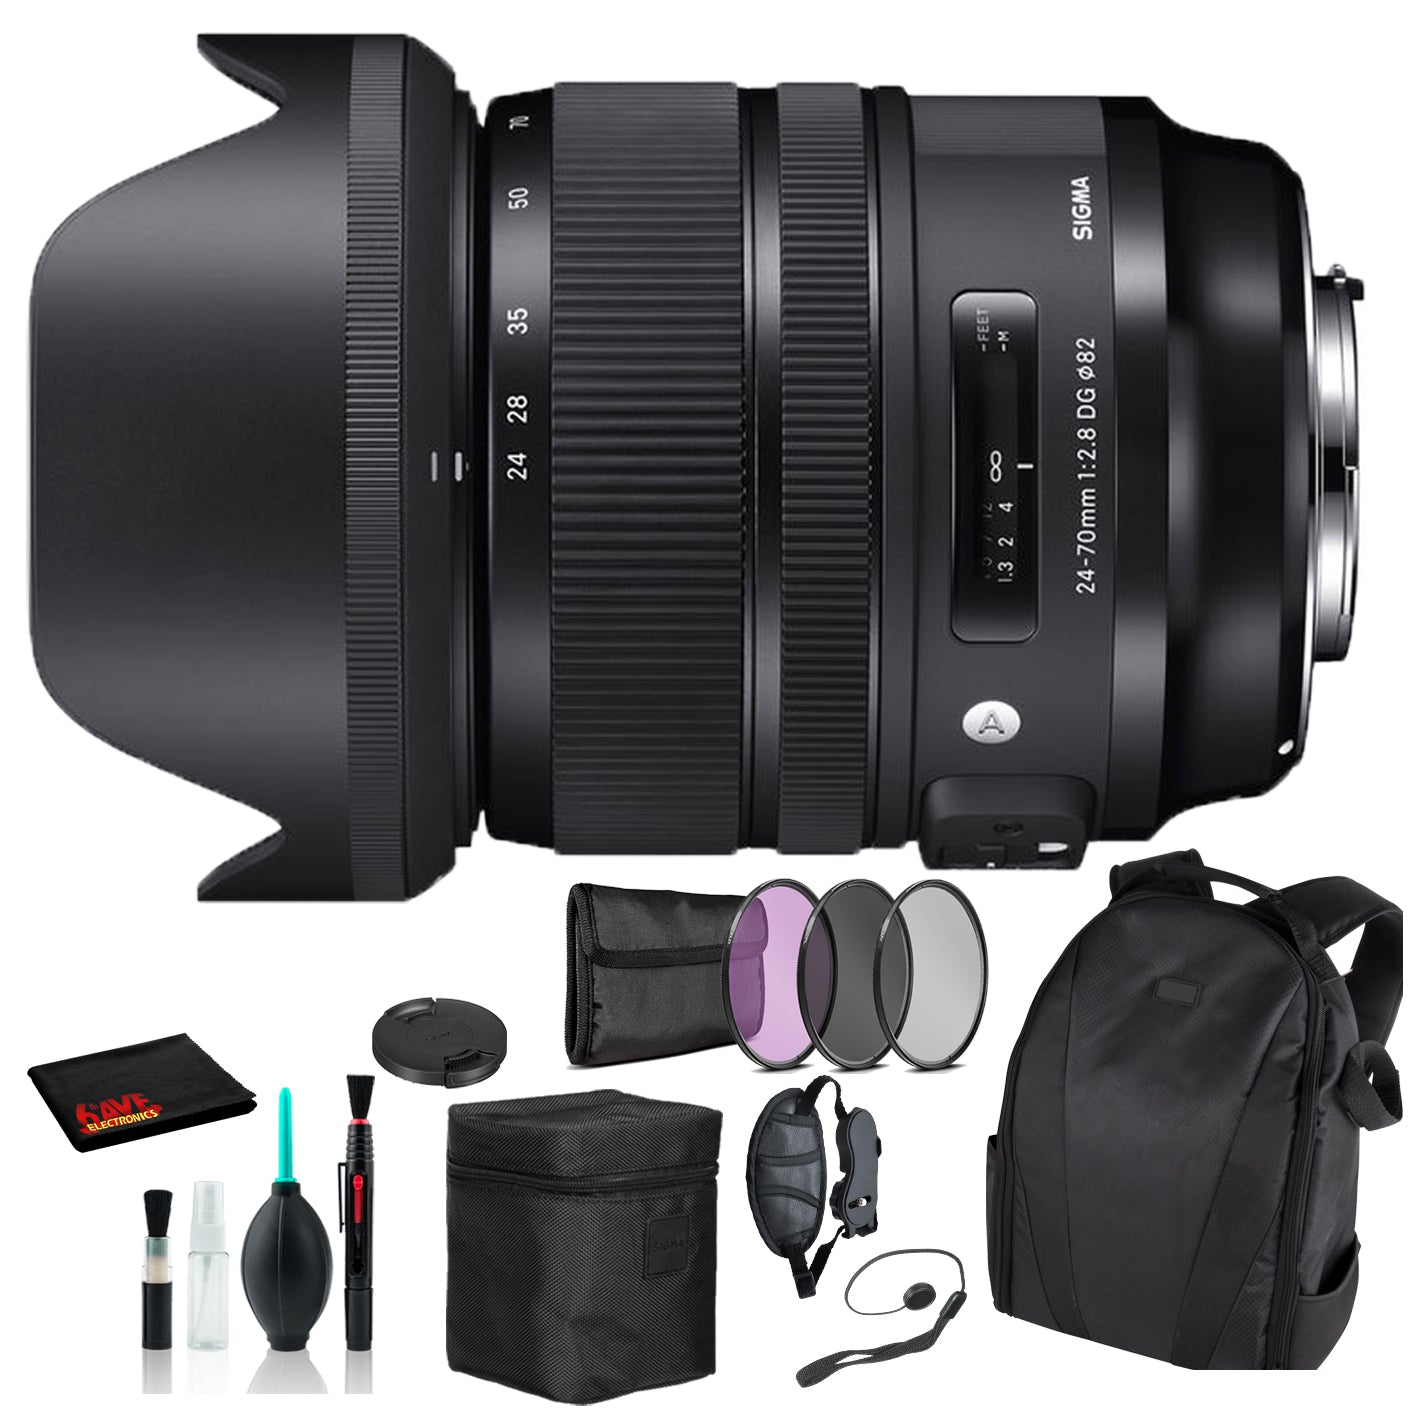 Sigma 24-70mm f/2.8 DG OS HSM Art Lens for Canon EF with Essential Bundle: Backpack + 3PC Filter + More